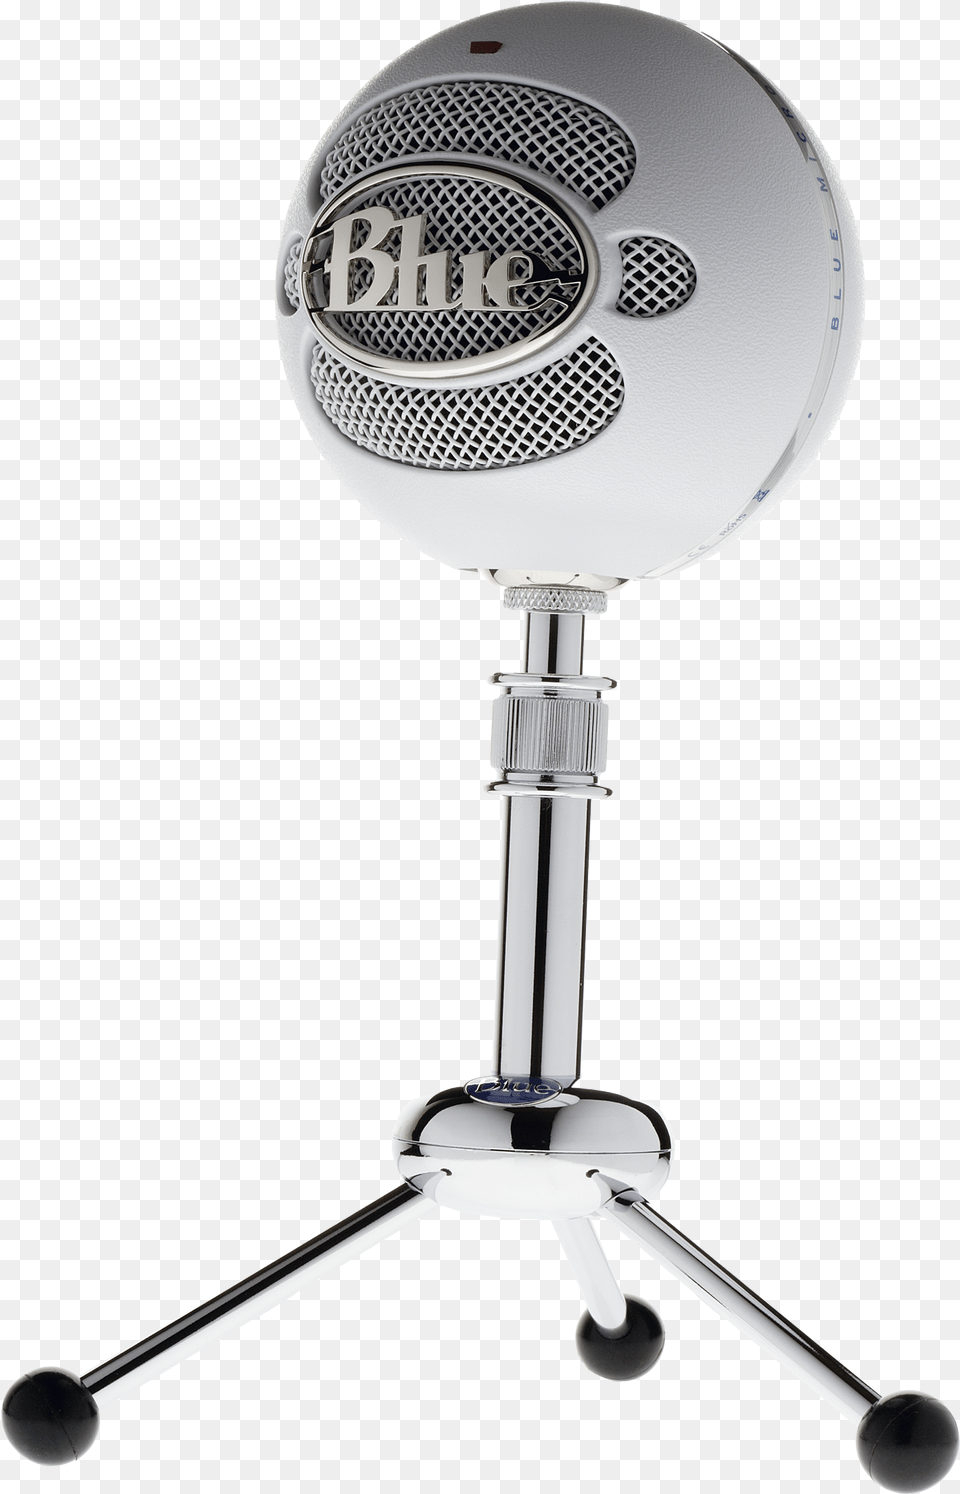 Hd Blue Snowball Ice Blue Snowball Microphone, Electrical Device, Appliance, Ceiling Fan, Device Free Png Download